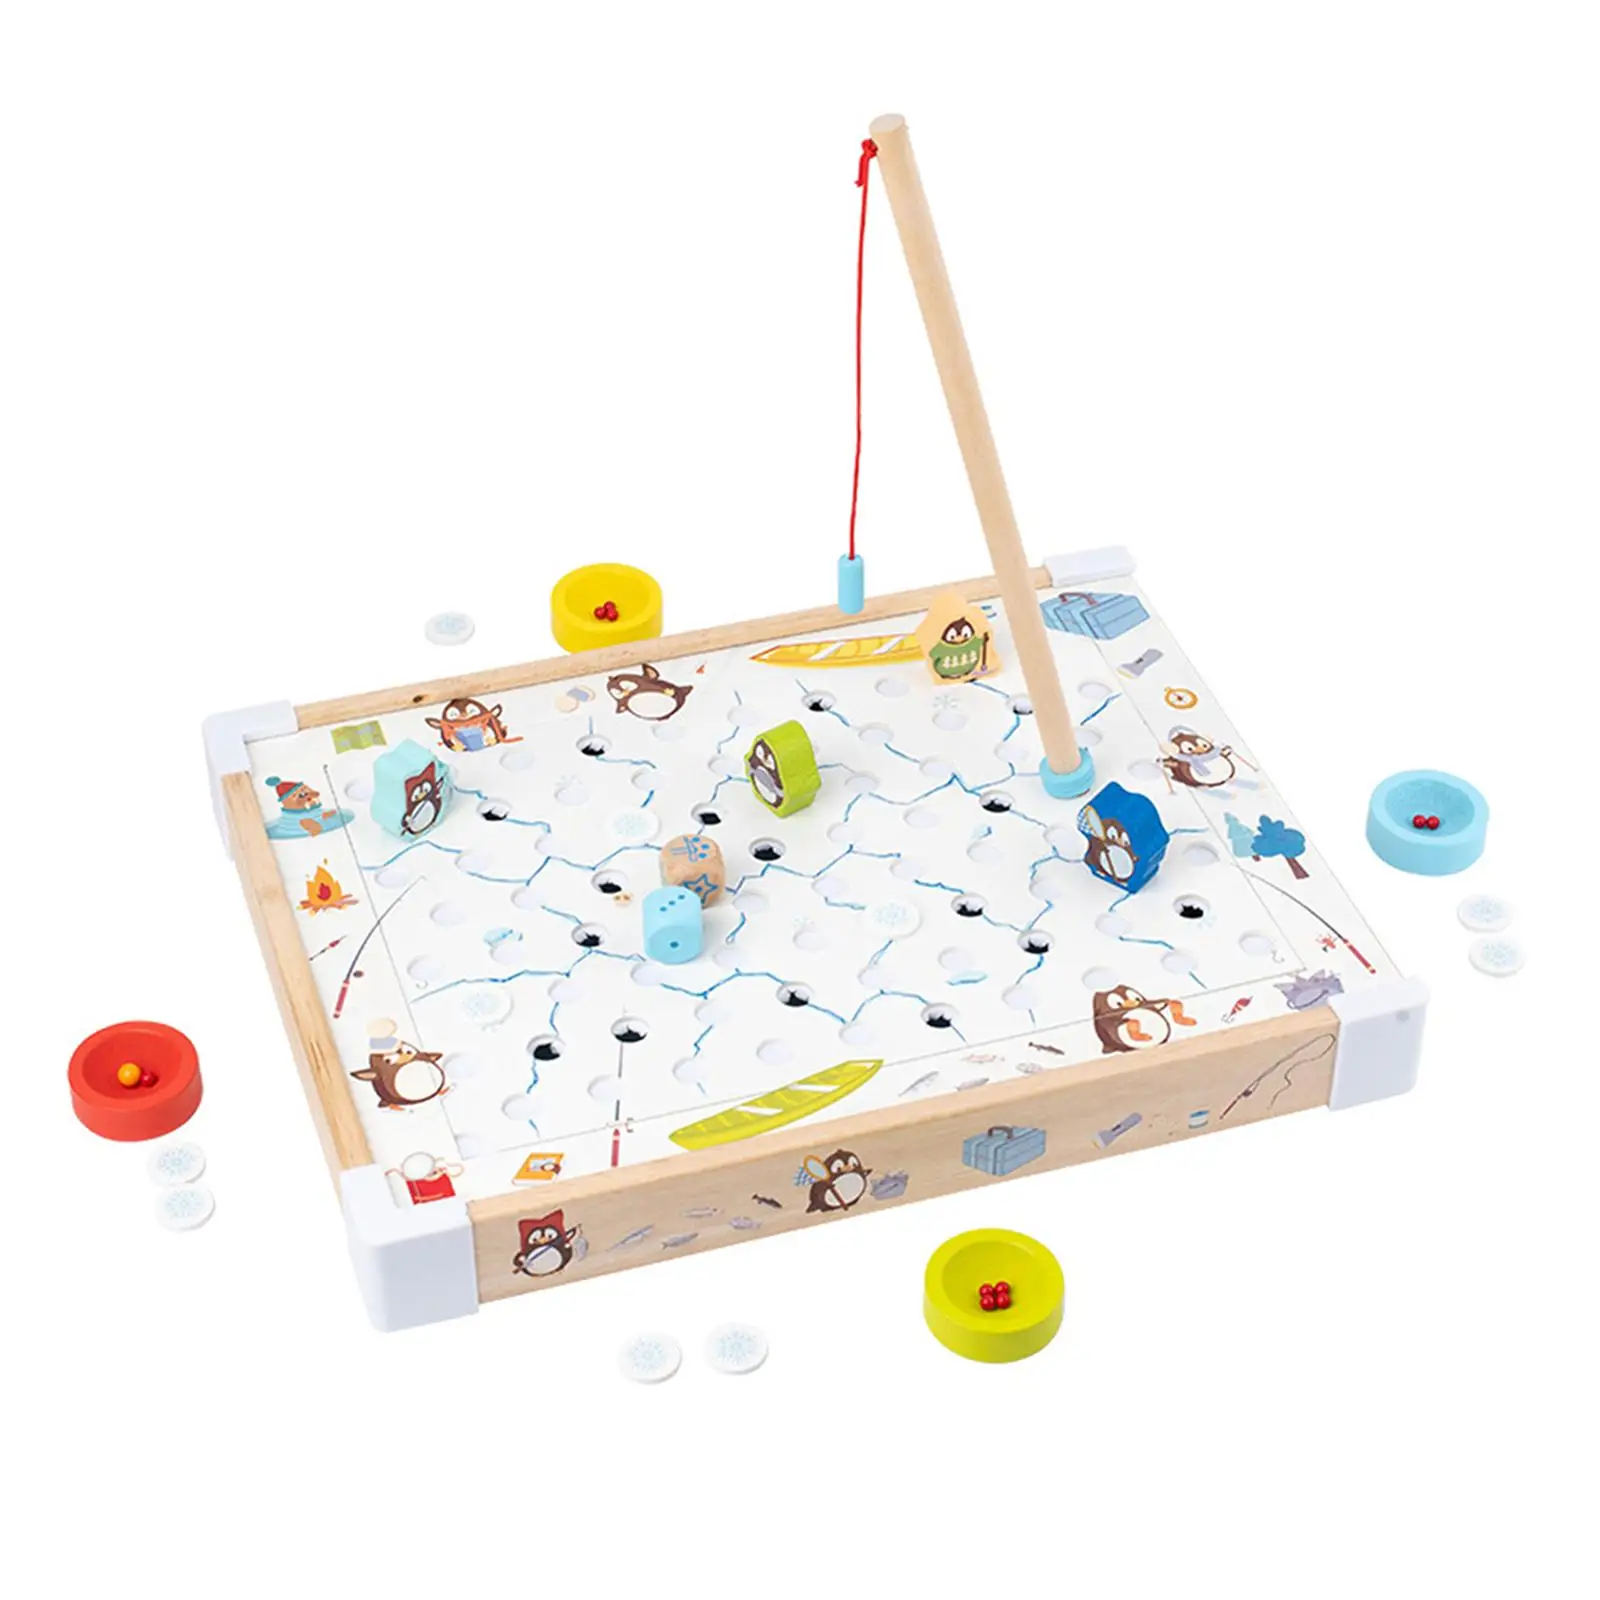 Board Game Novelty Preschool Learning Educational Toy Fishing Game Play Set for Toddlers Children Kids Boys Birthday Gifts